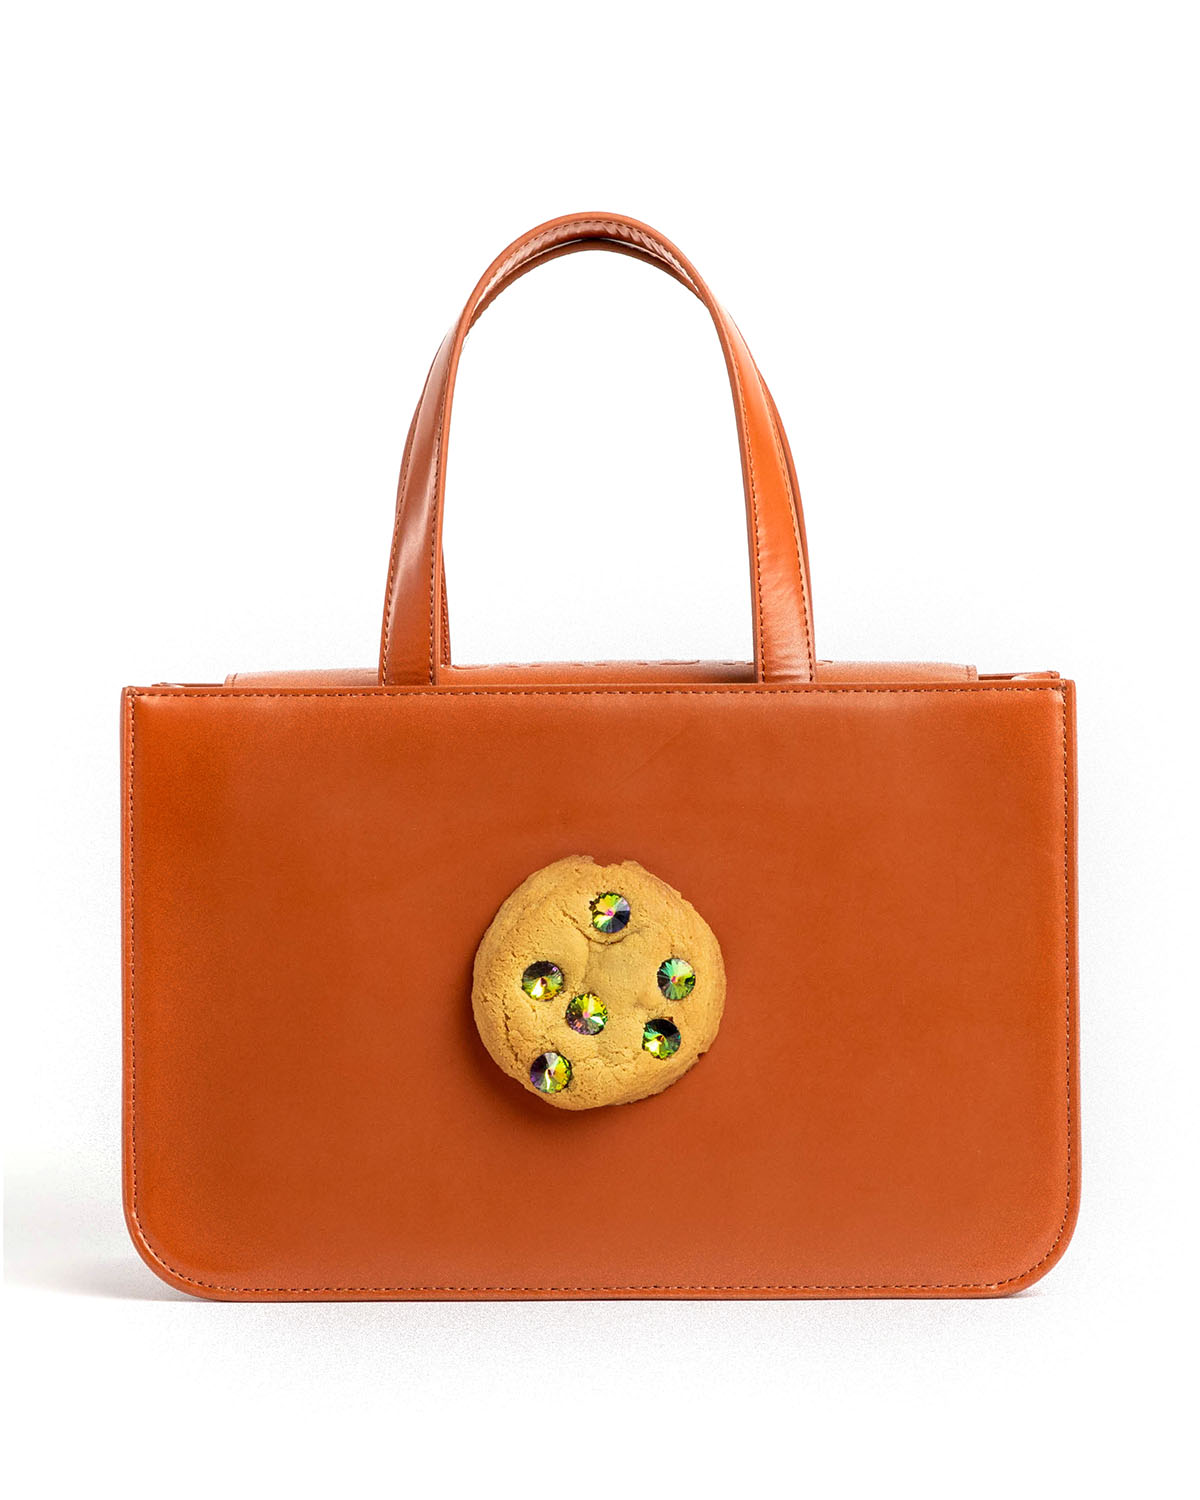 Puppets and Puppets put a cookie on a handbag, and the rest is